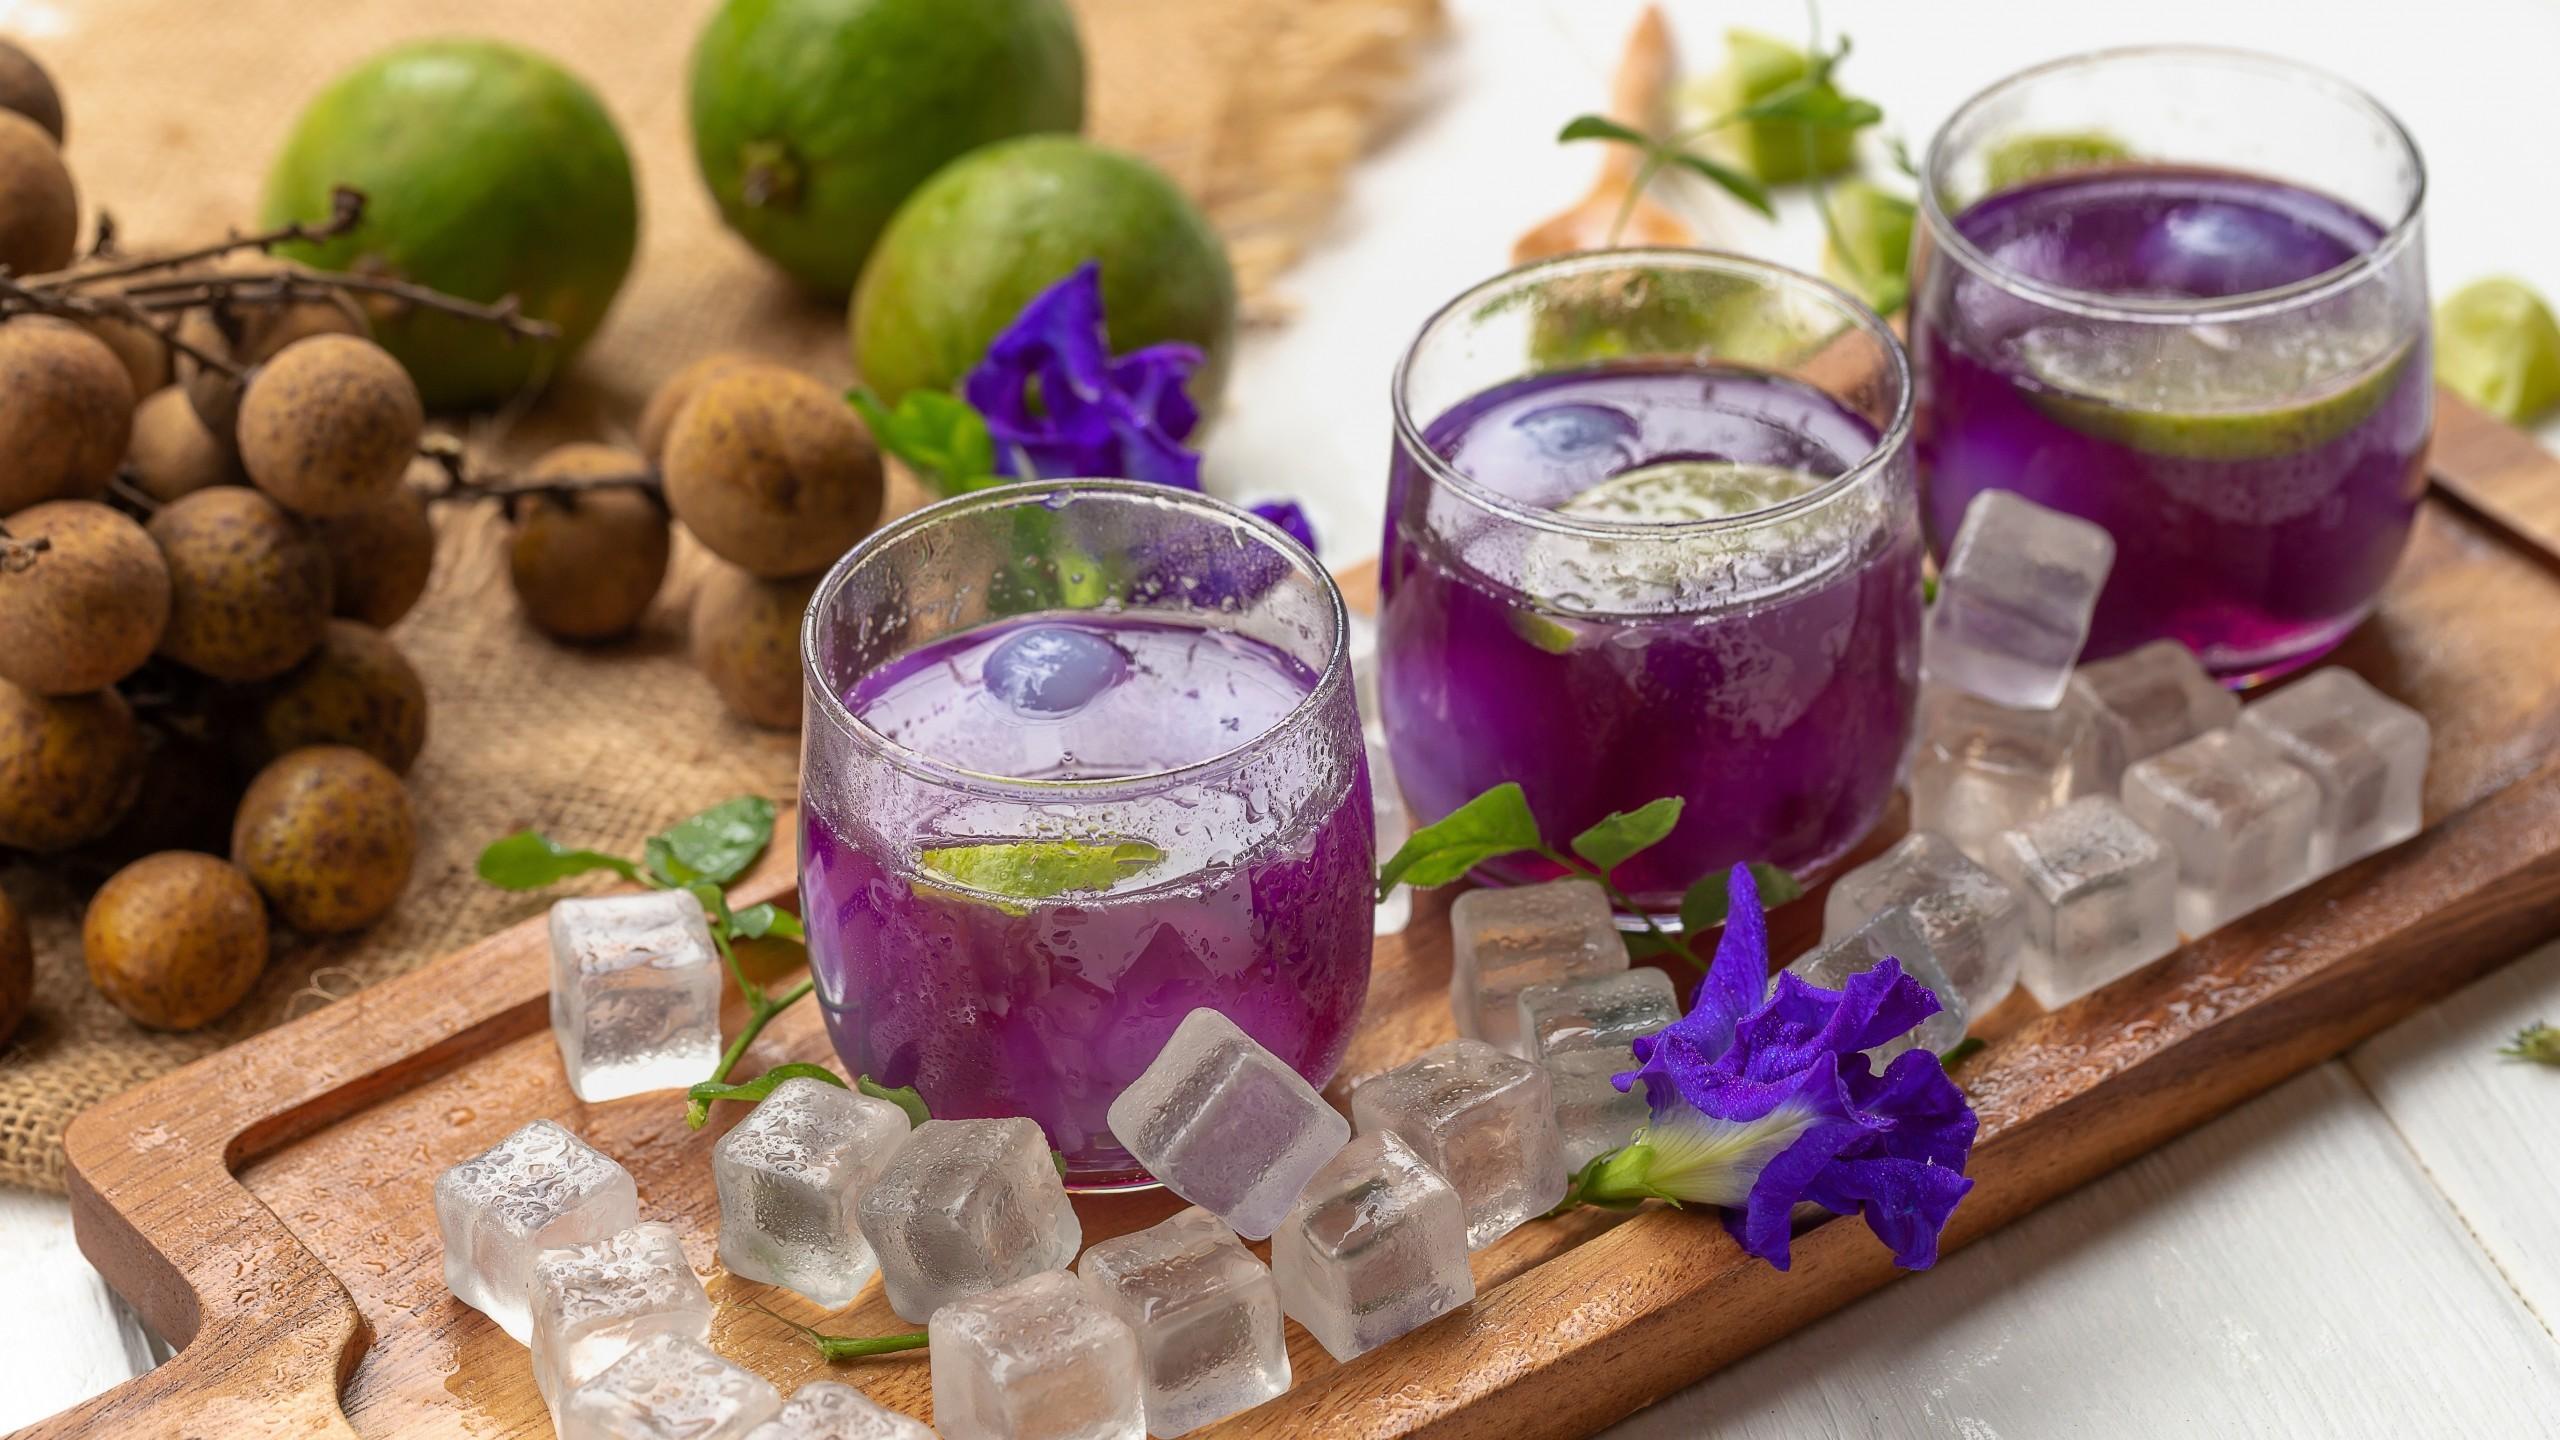 Download 2560x1440 Purple Fruit Drink, Ice Cubes Wallpaper for iMac